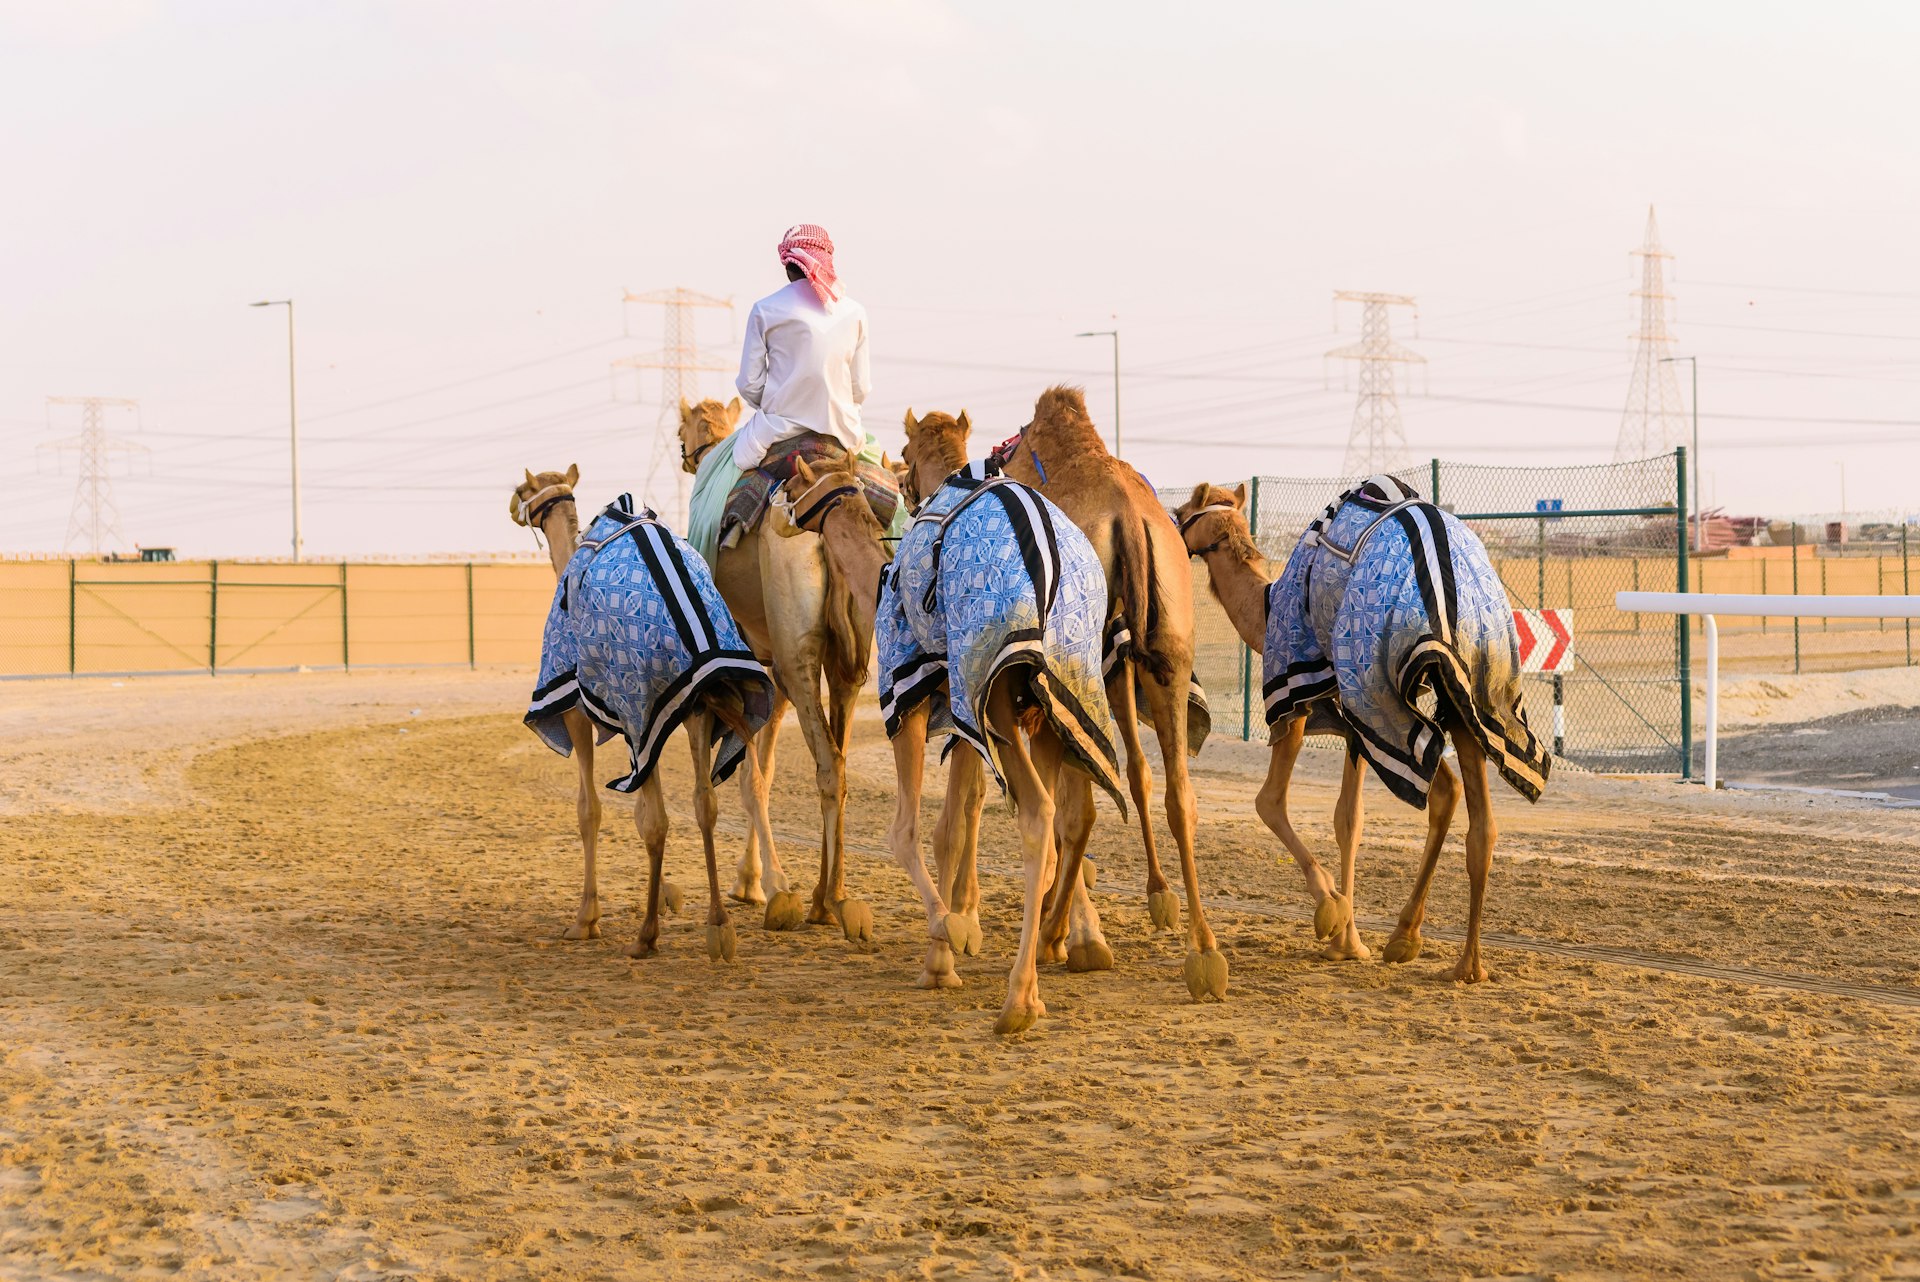 Camel rider with a flock of camels after a camel race in Al Wathba near Abu Dhabi.